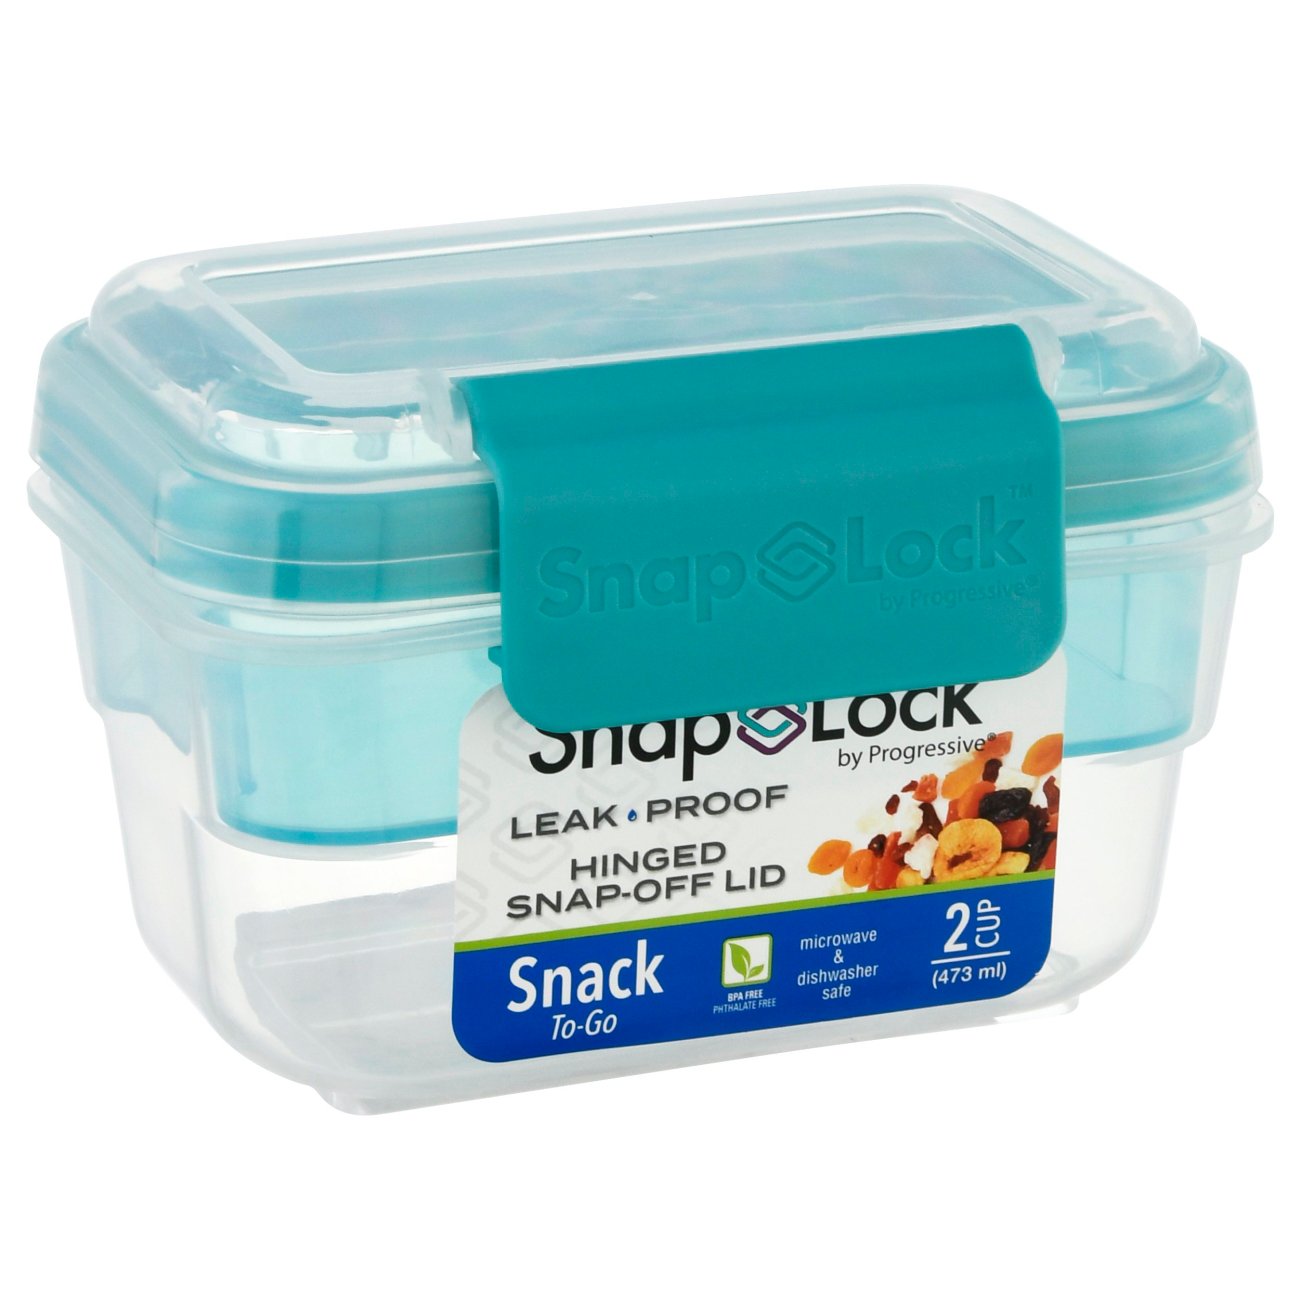 snap lock containers costco